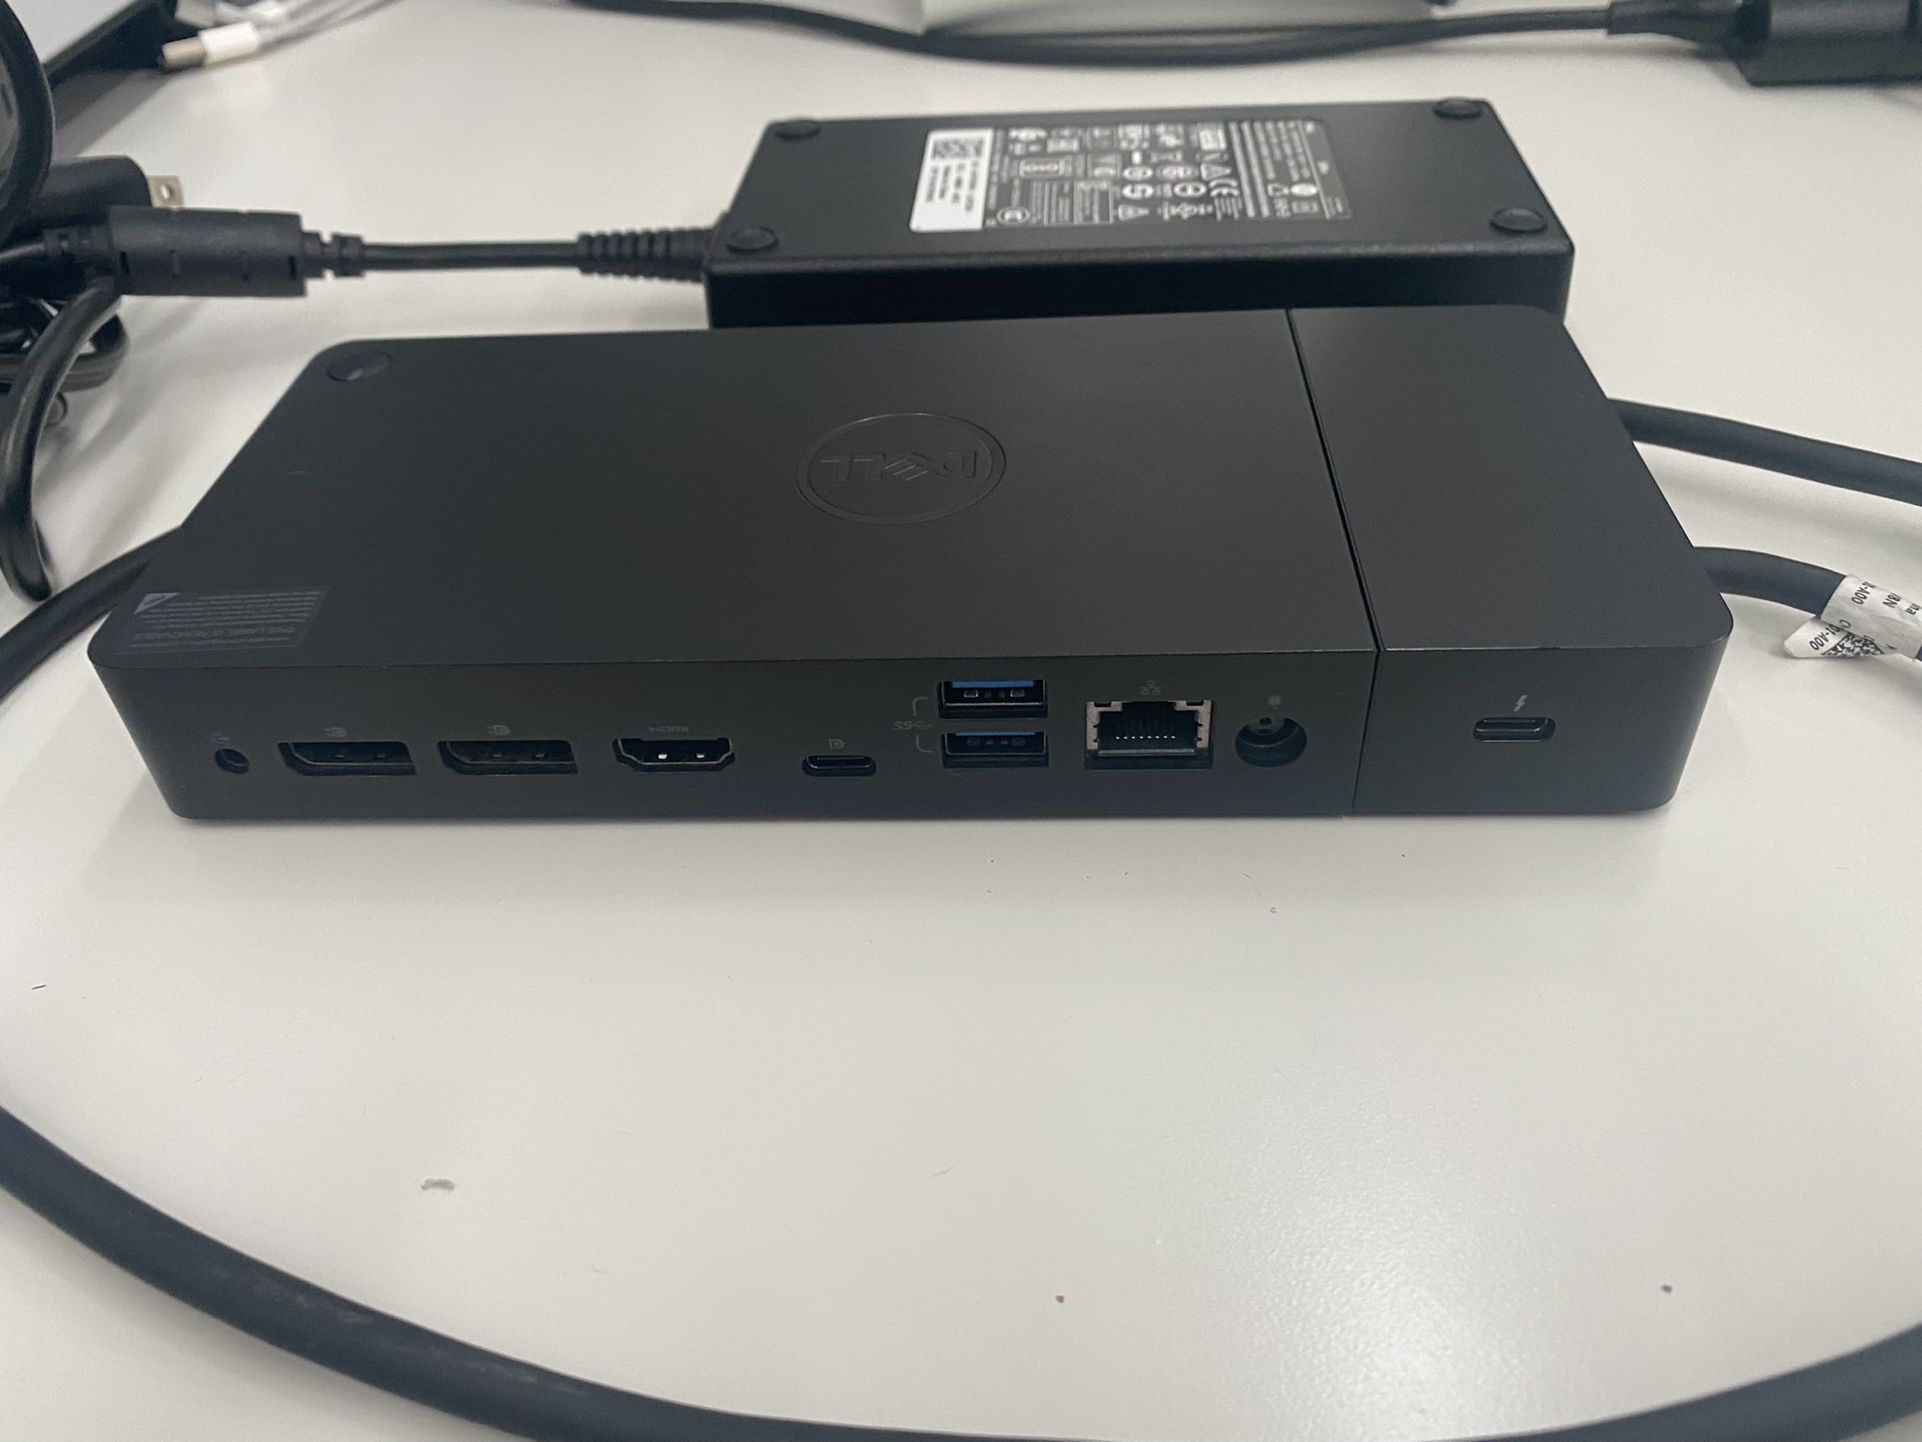 Dell WD19 USB Type-C Dockinghh Station with 180 AC Adapter - Black